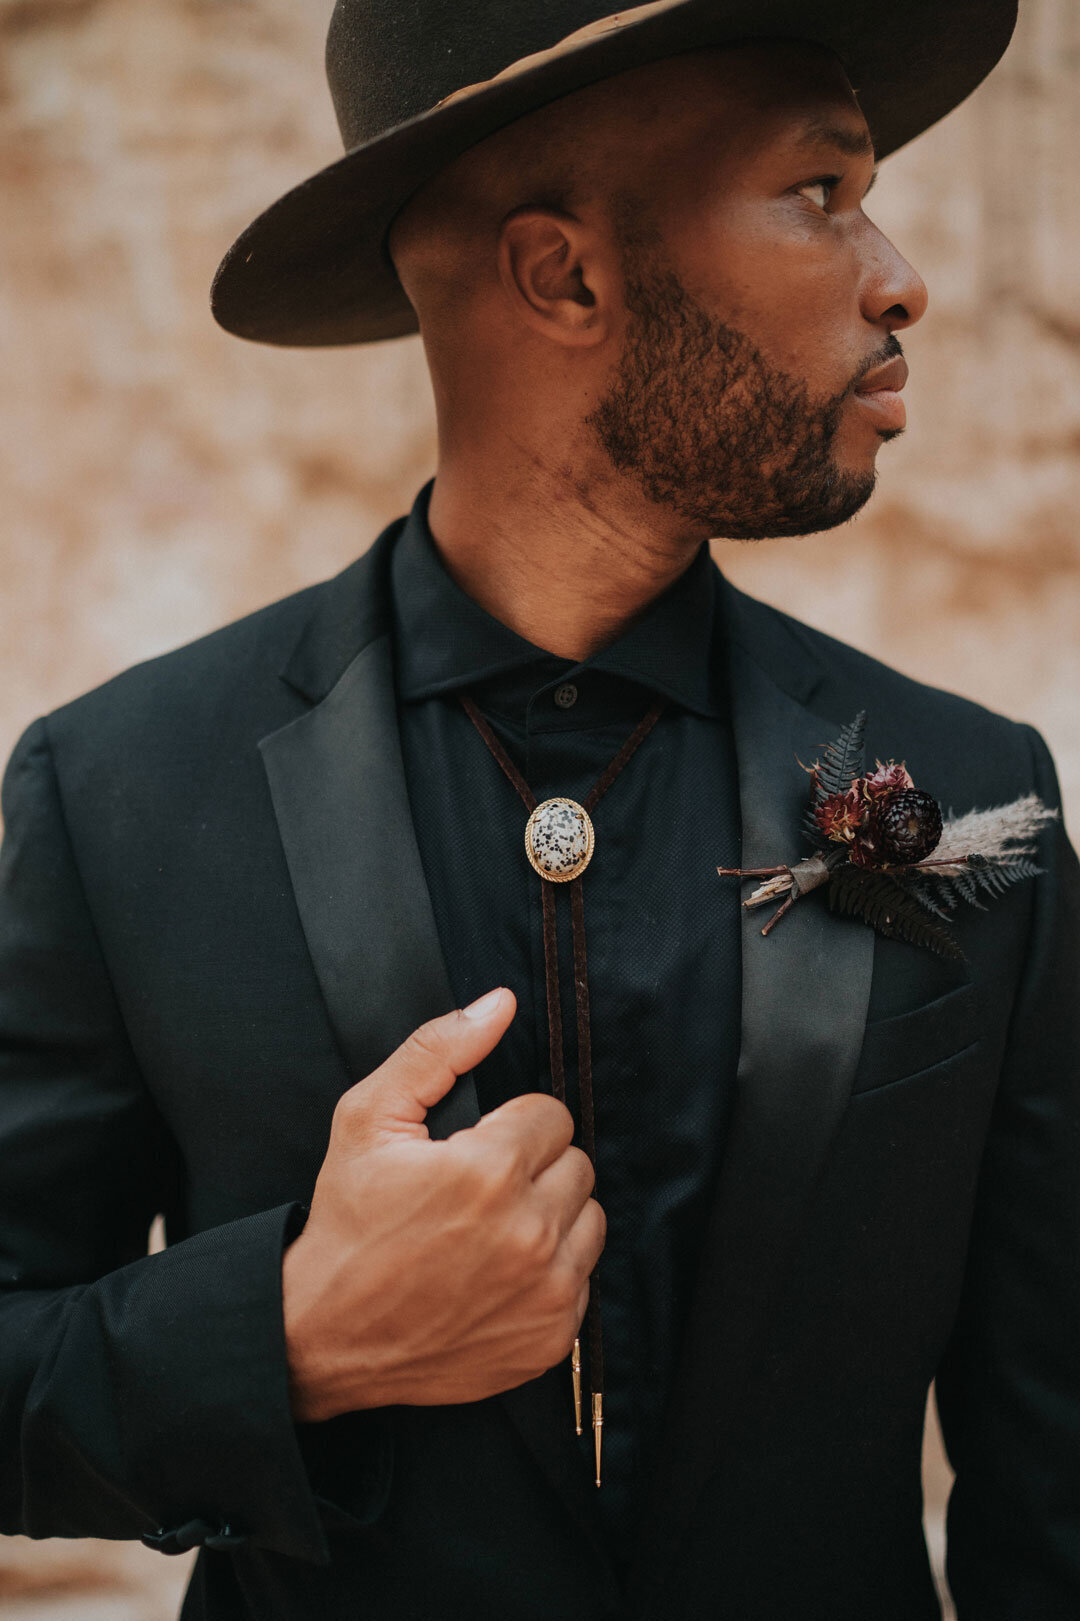 Black groom wearing a black suit and hat